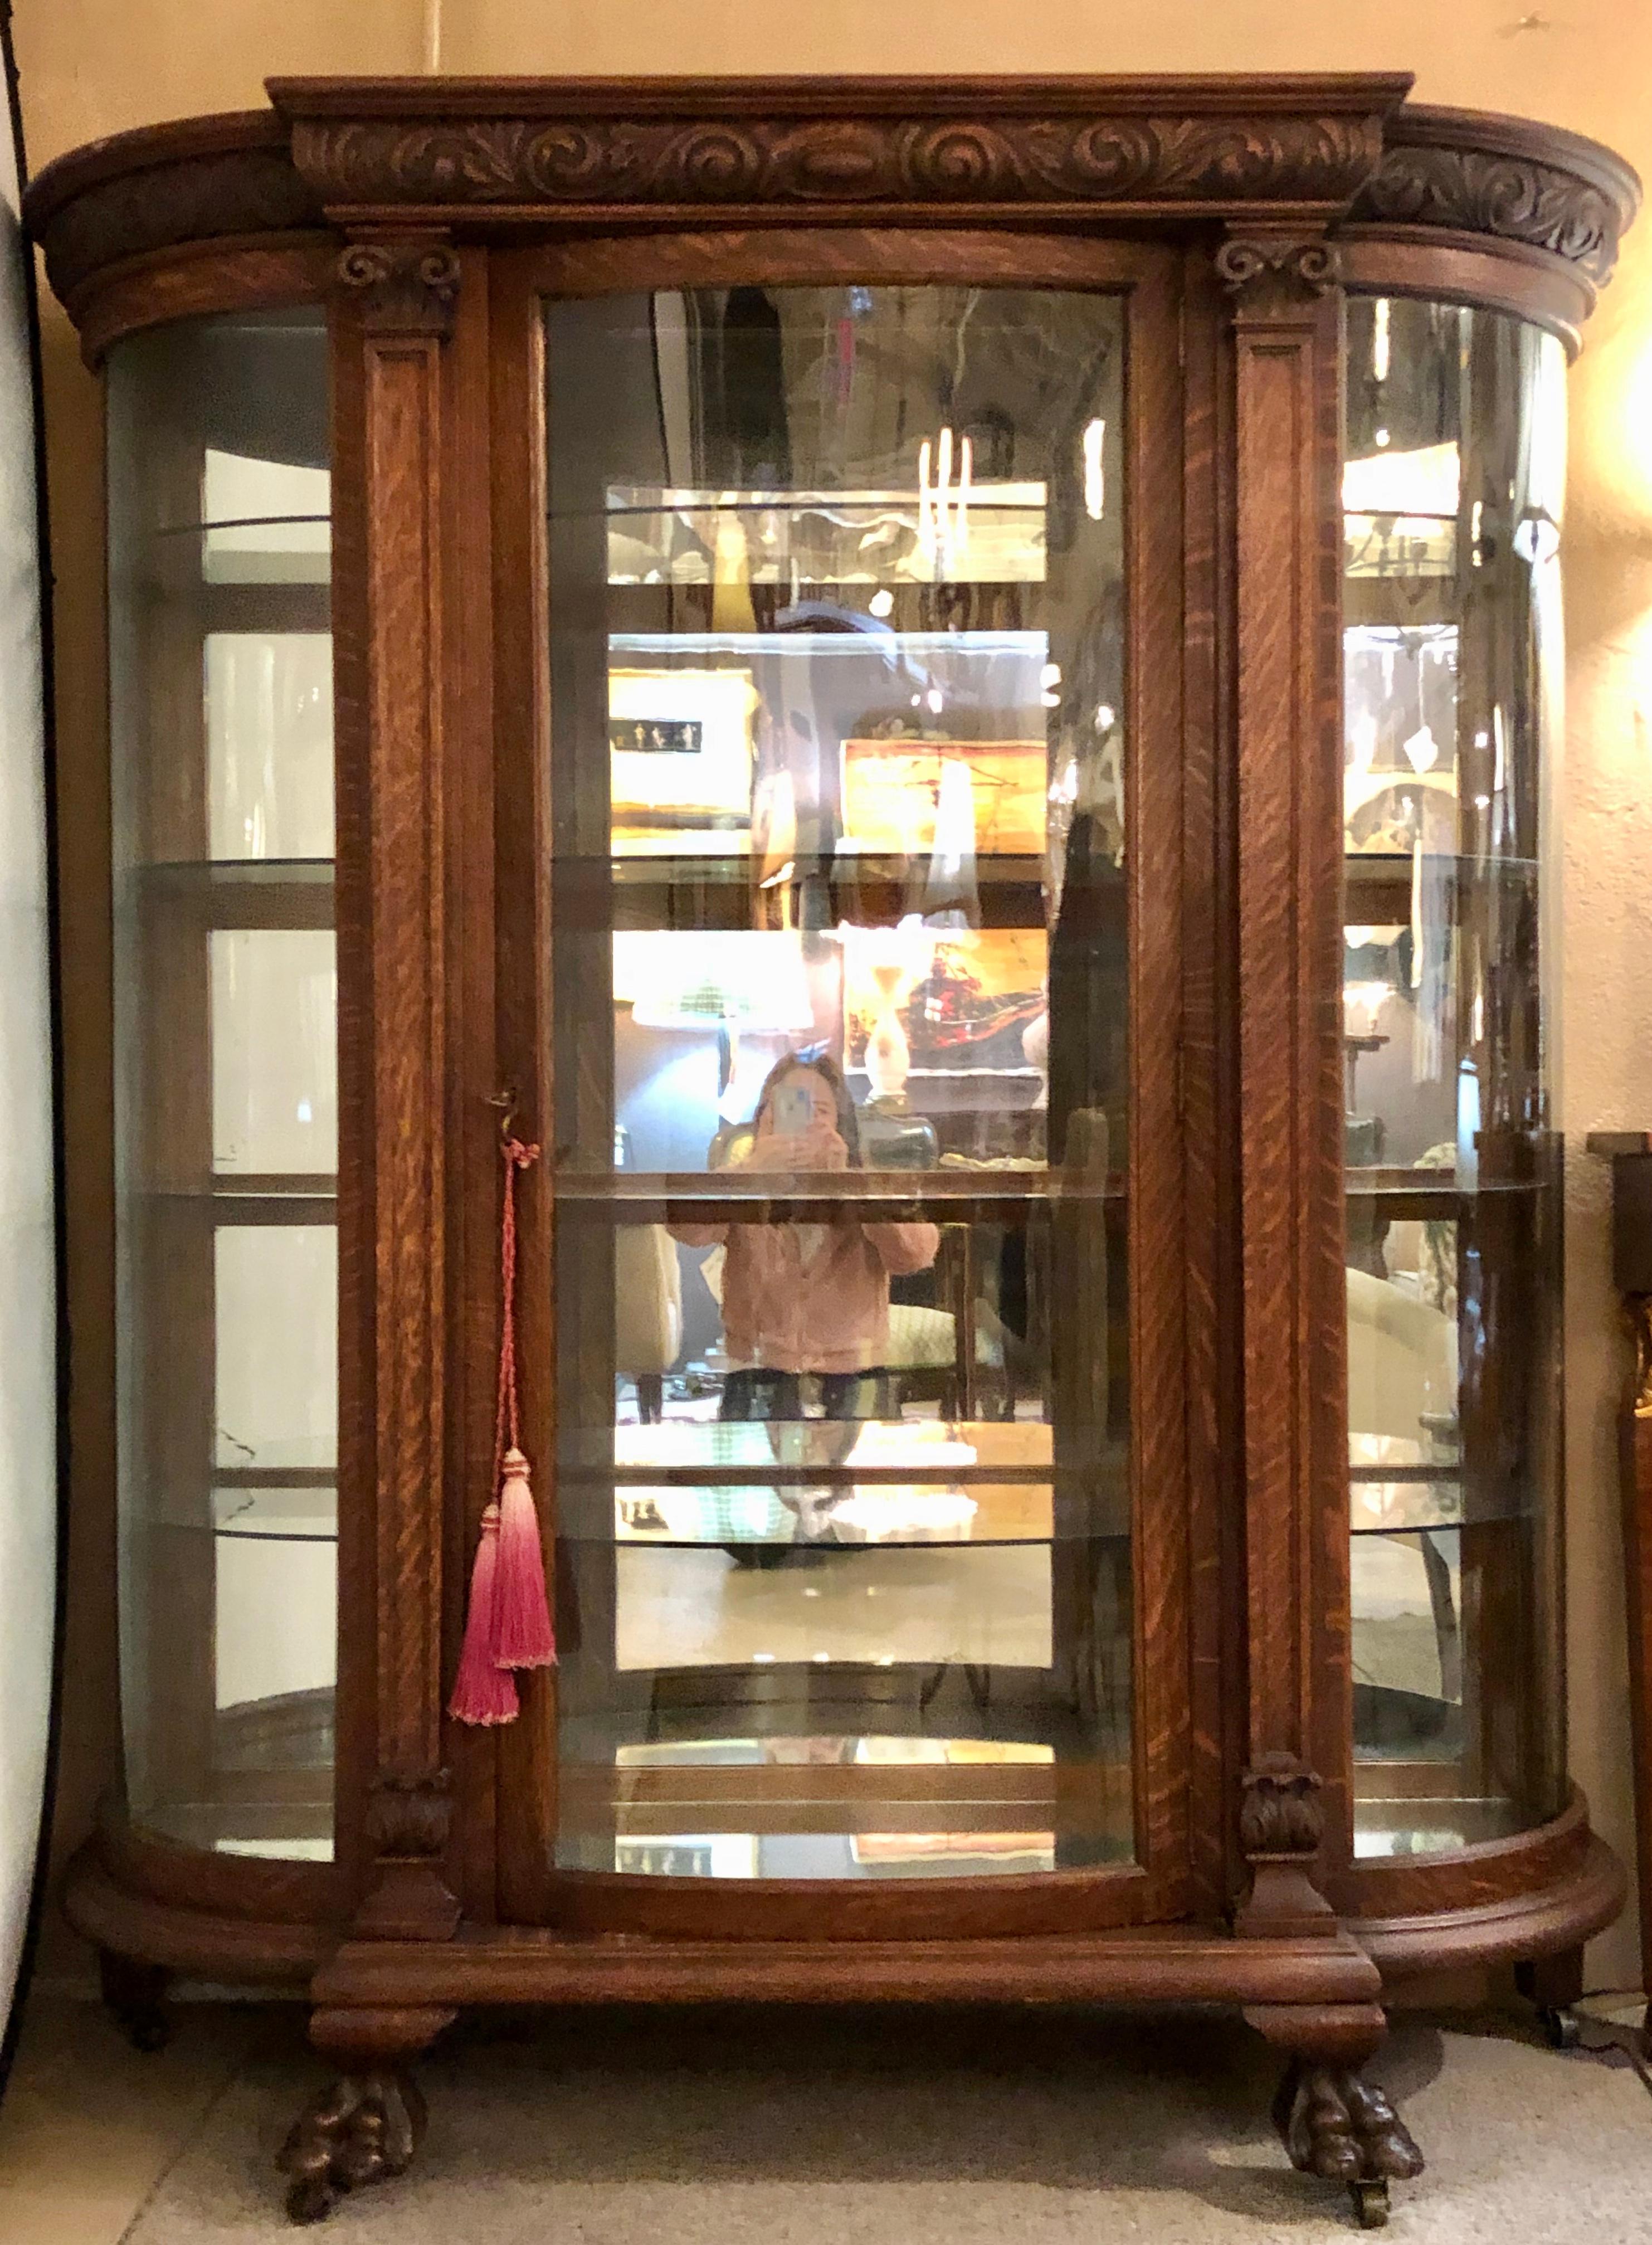 R J Horner or Herter Brothers carved China cabinet or vitrine circa 1920s of tiger oak. A wonderfully stylish Victorian piece of furniture as this large and impressive china cabinet depicts the sign of the times wonderfully. Raised on finely carved